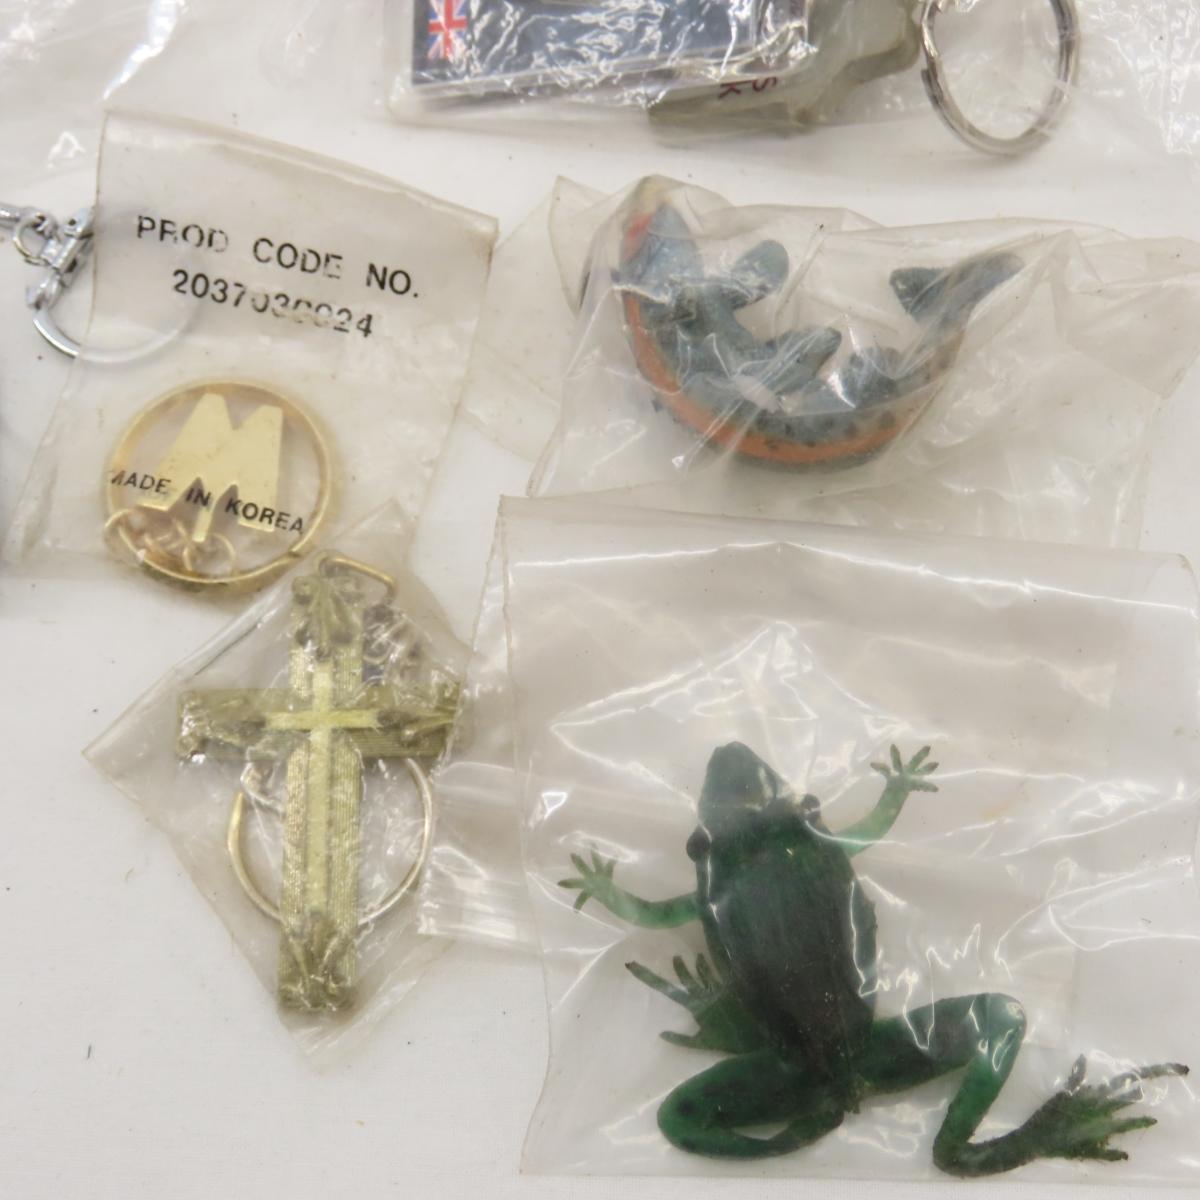 Keychains, Belt Buckles, Fishing Items & More